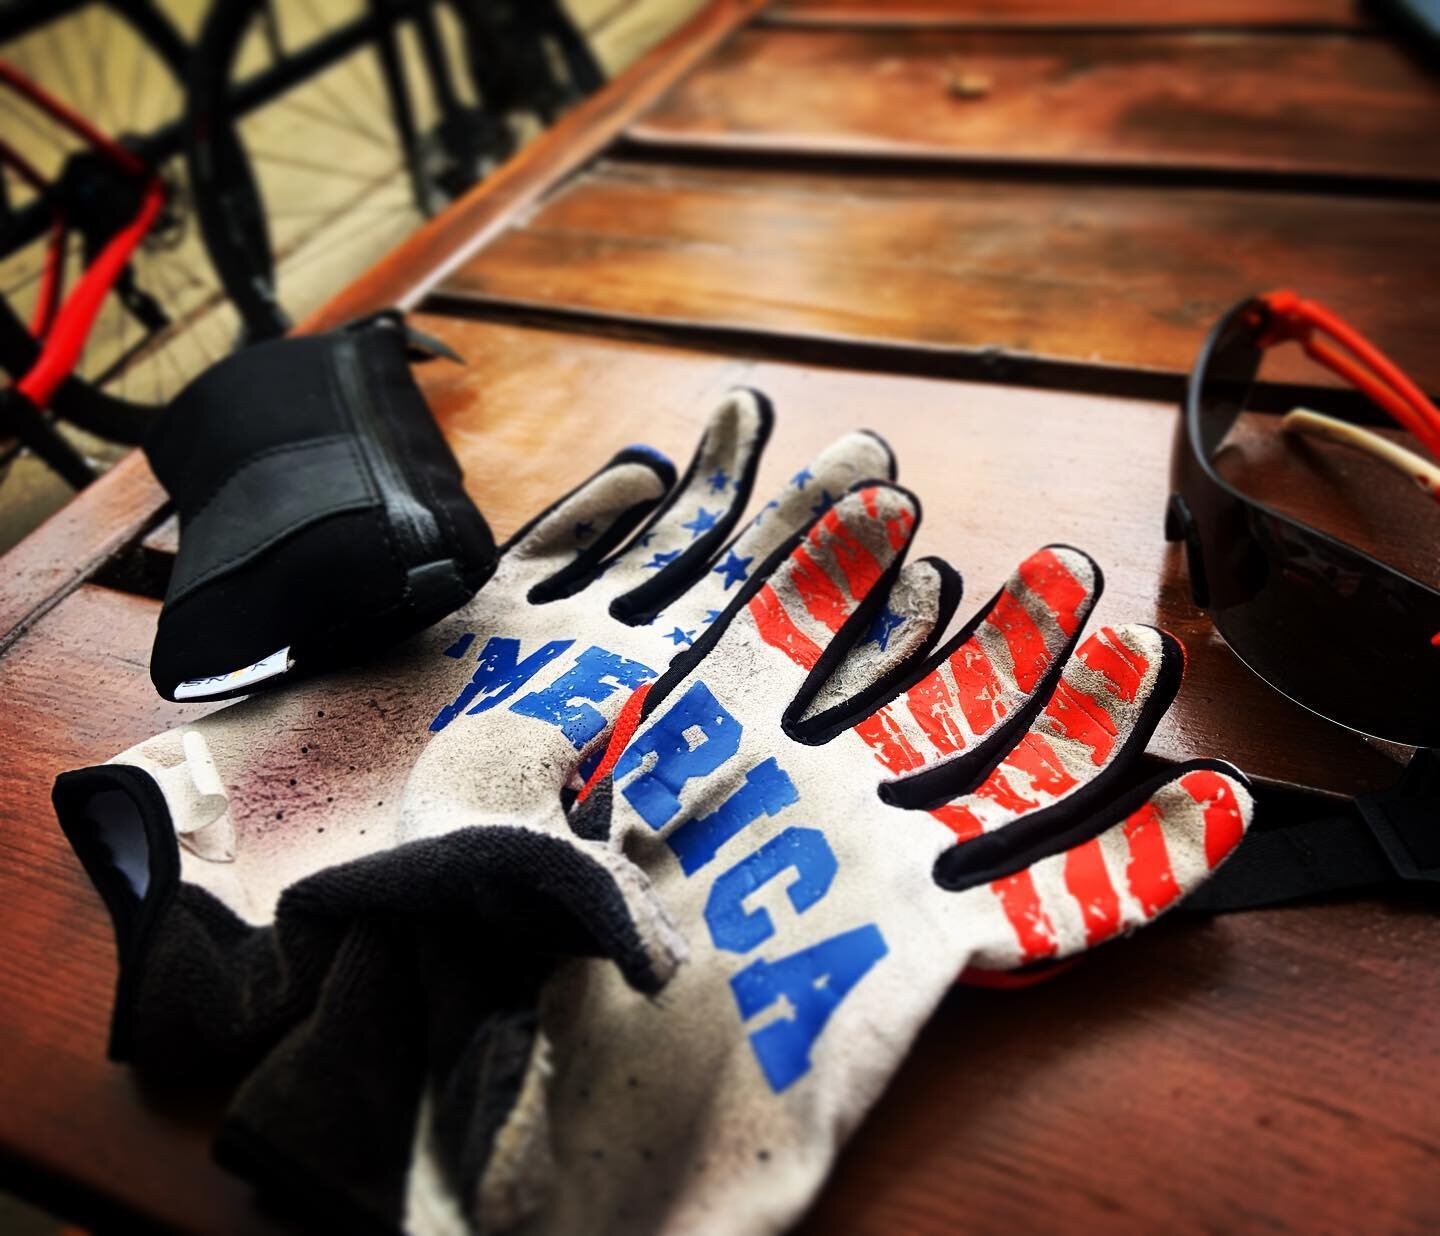 I&rsquo;ve put these @handupgloves through the ringers for 3 years now. They have gained a lot of character, a few holes, and gotten a bit faded. Yet they still provide the same message and get the job done! Happy 4th of July weekend everyone. Go hav